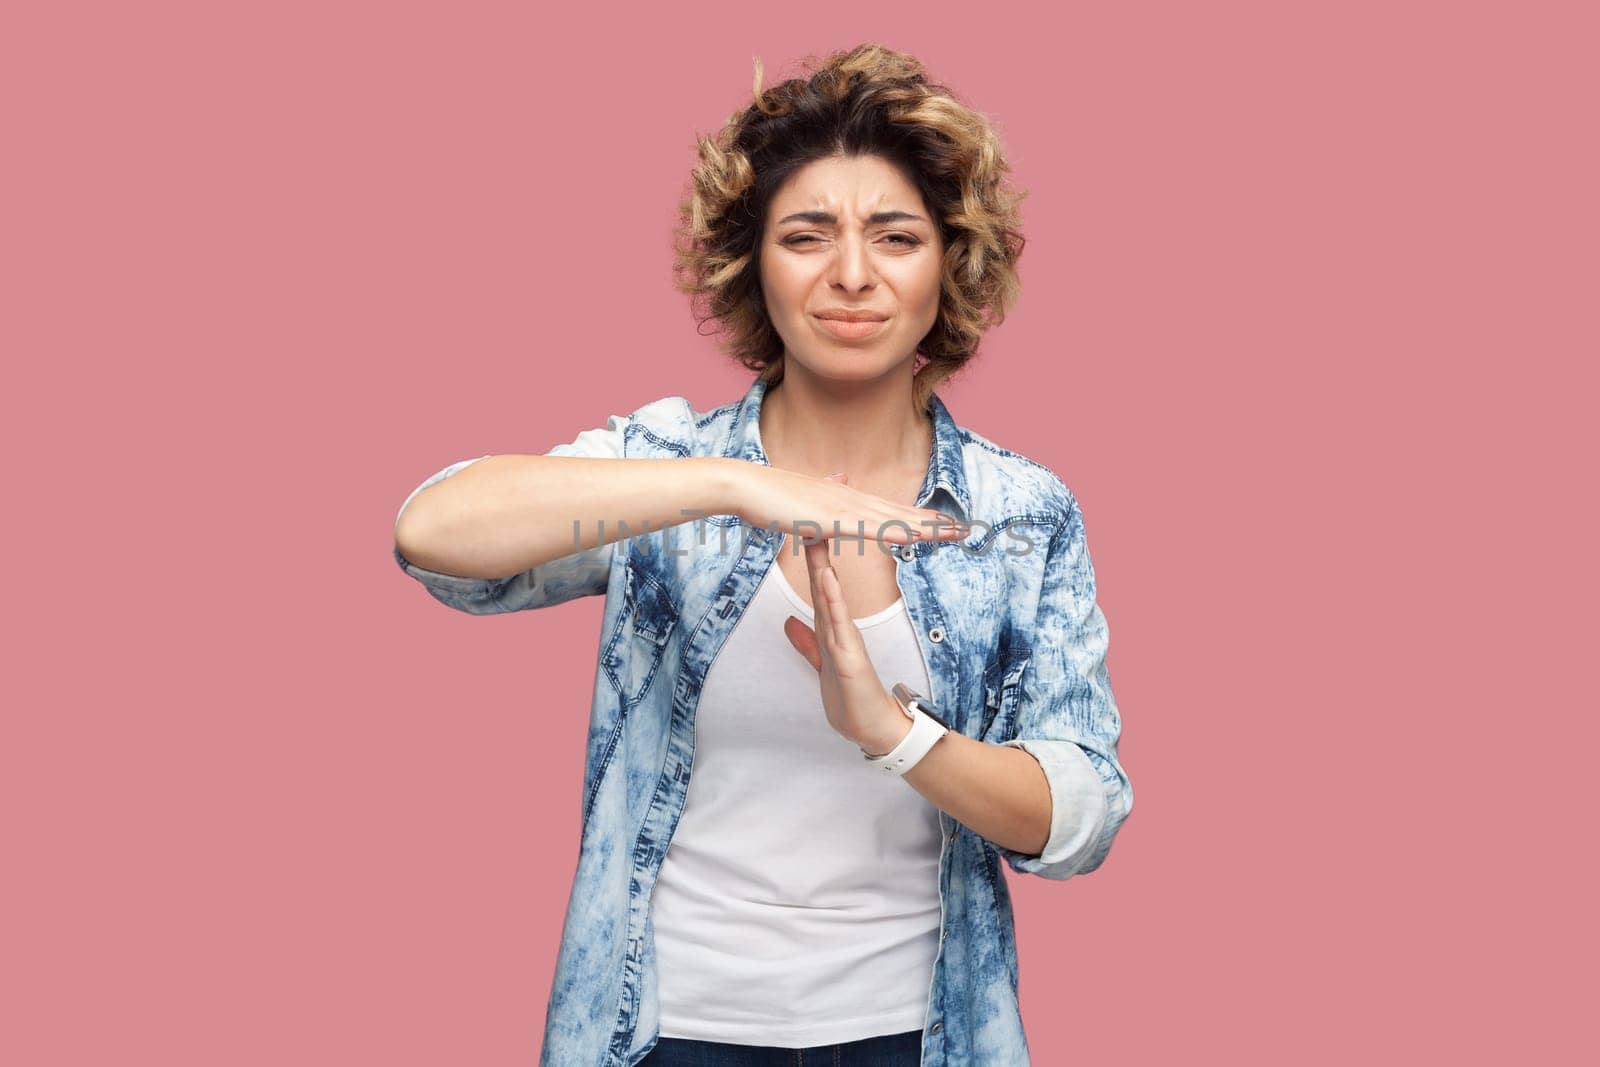 Portrait of sad depressed woman with curly hairstyle wearing blue shirt standing showing time out gesture, looking at camera, expressing sadness. Indoor studio shot isolated on pink background.